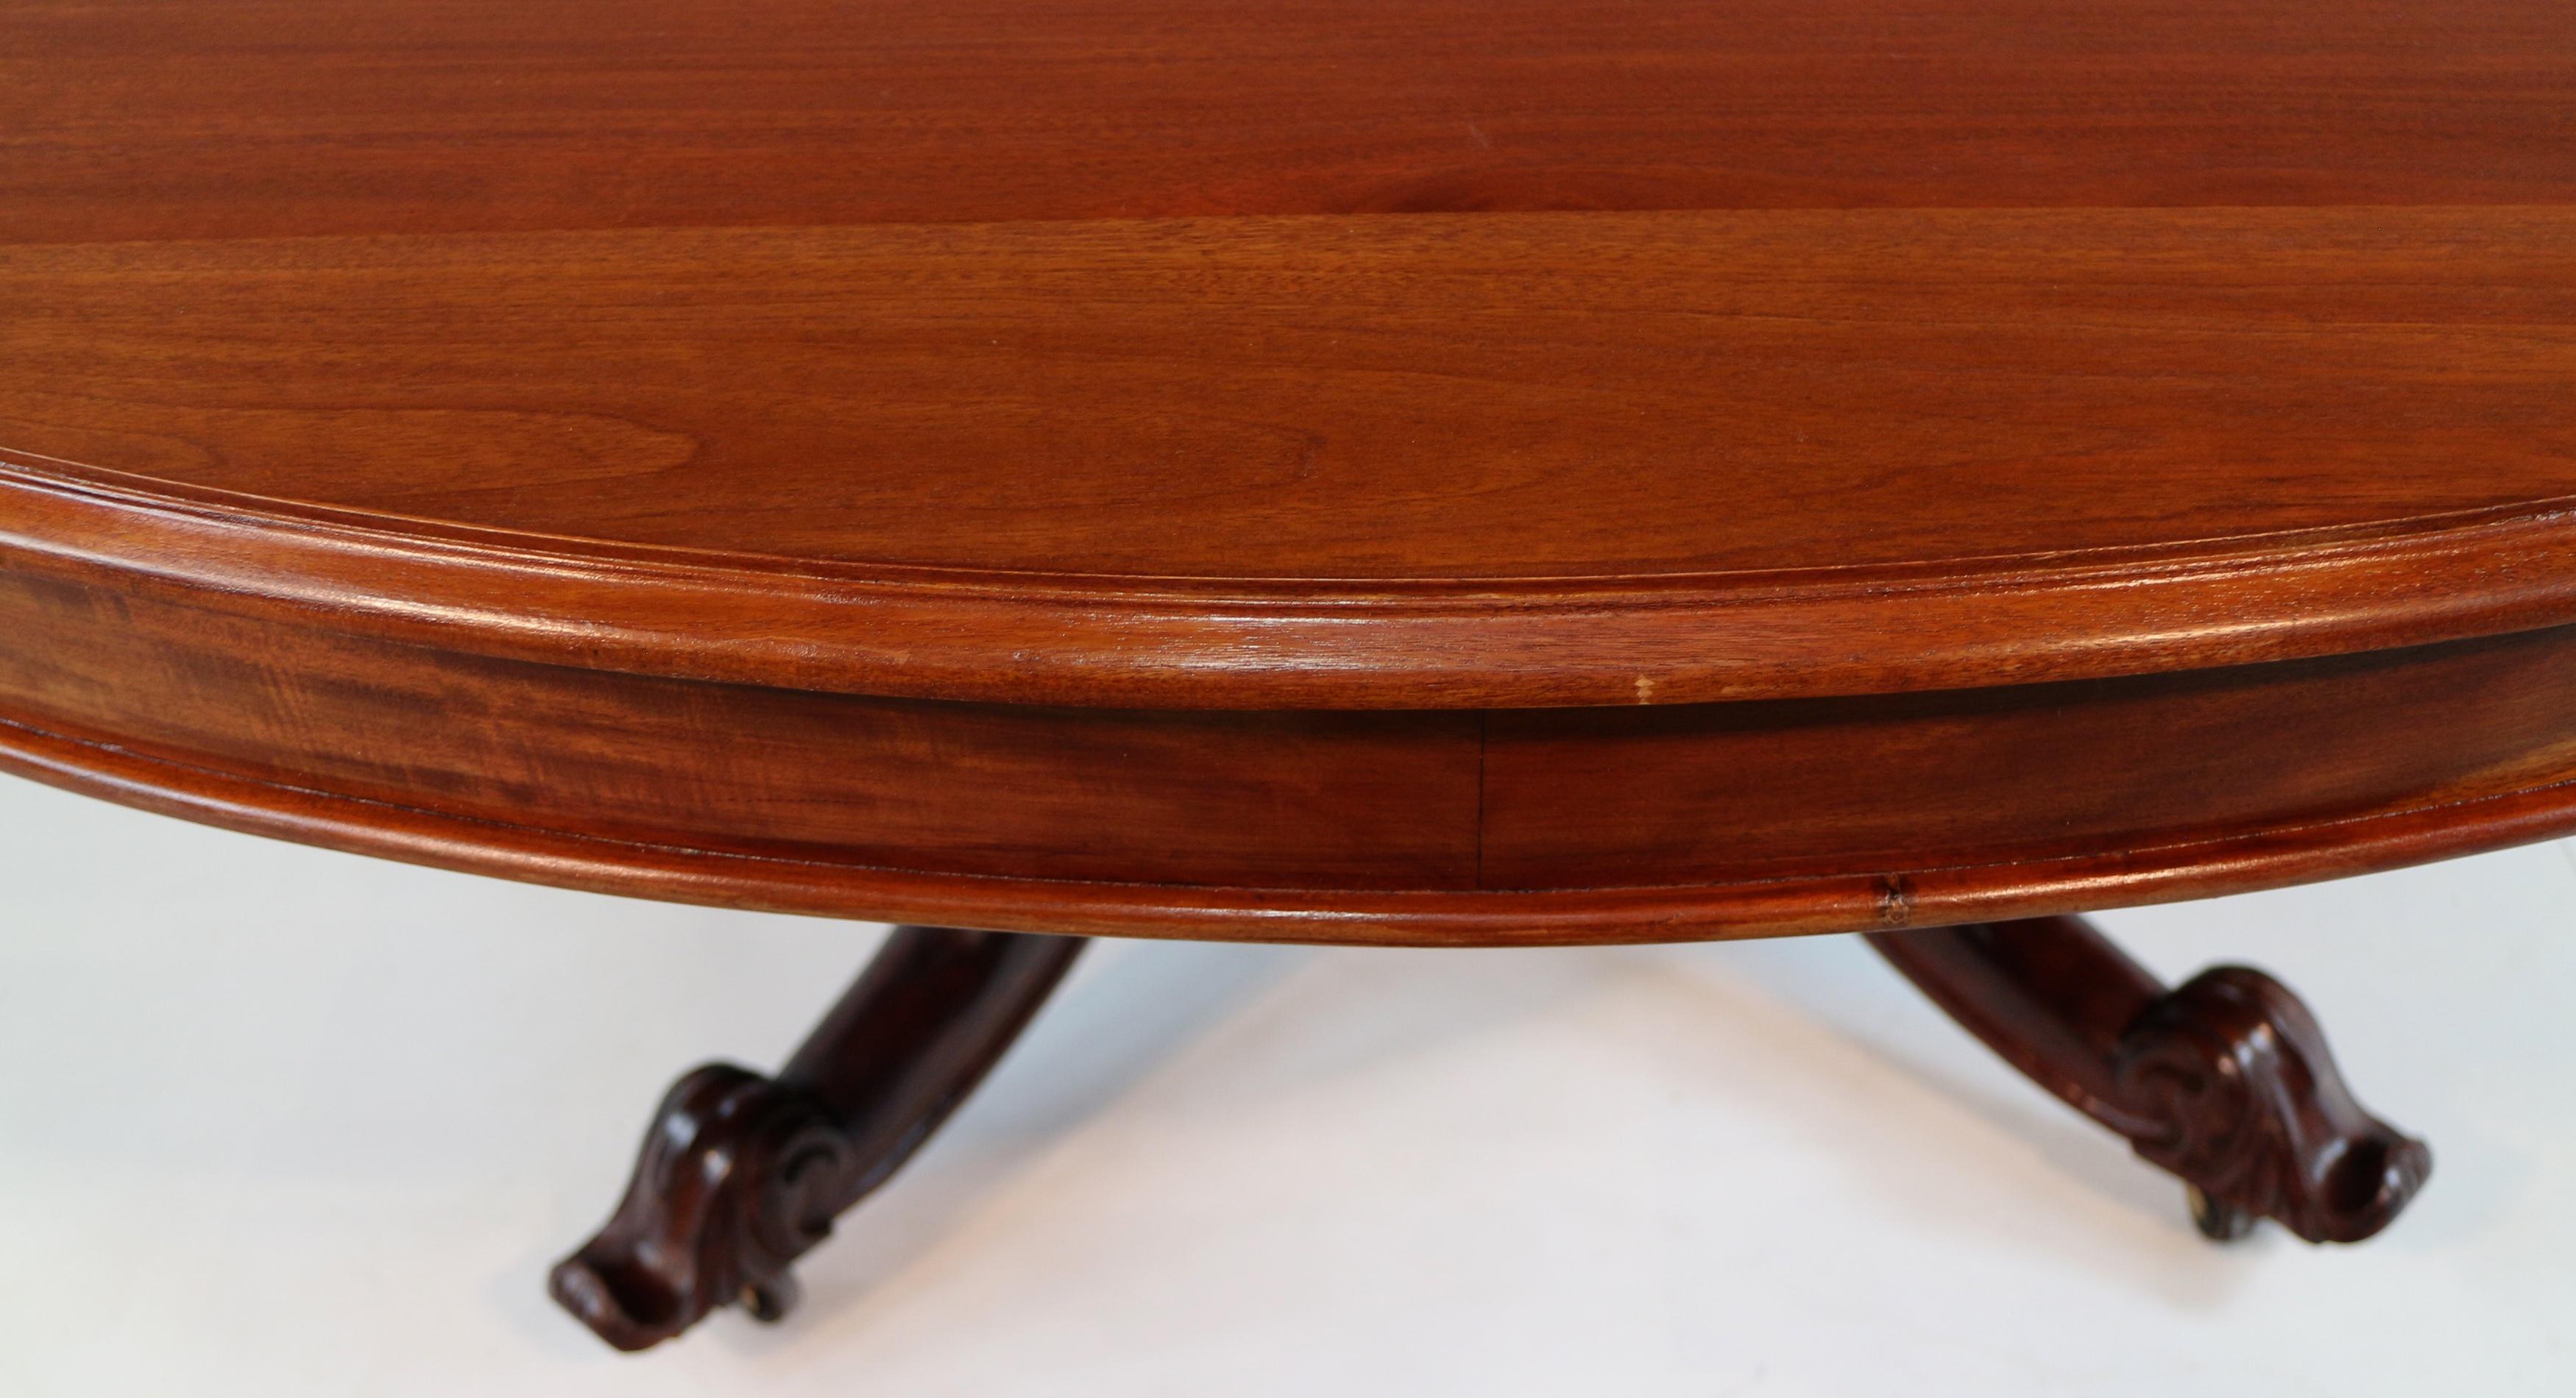 Large Victorian Style Mahogany Circular Centre Table - 6ft7 / 2m diameter For Sale 10